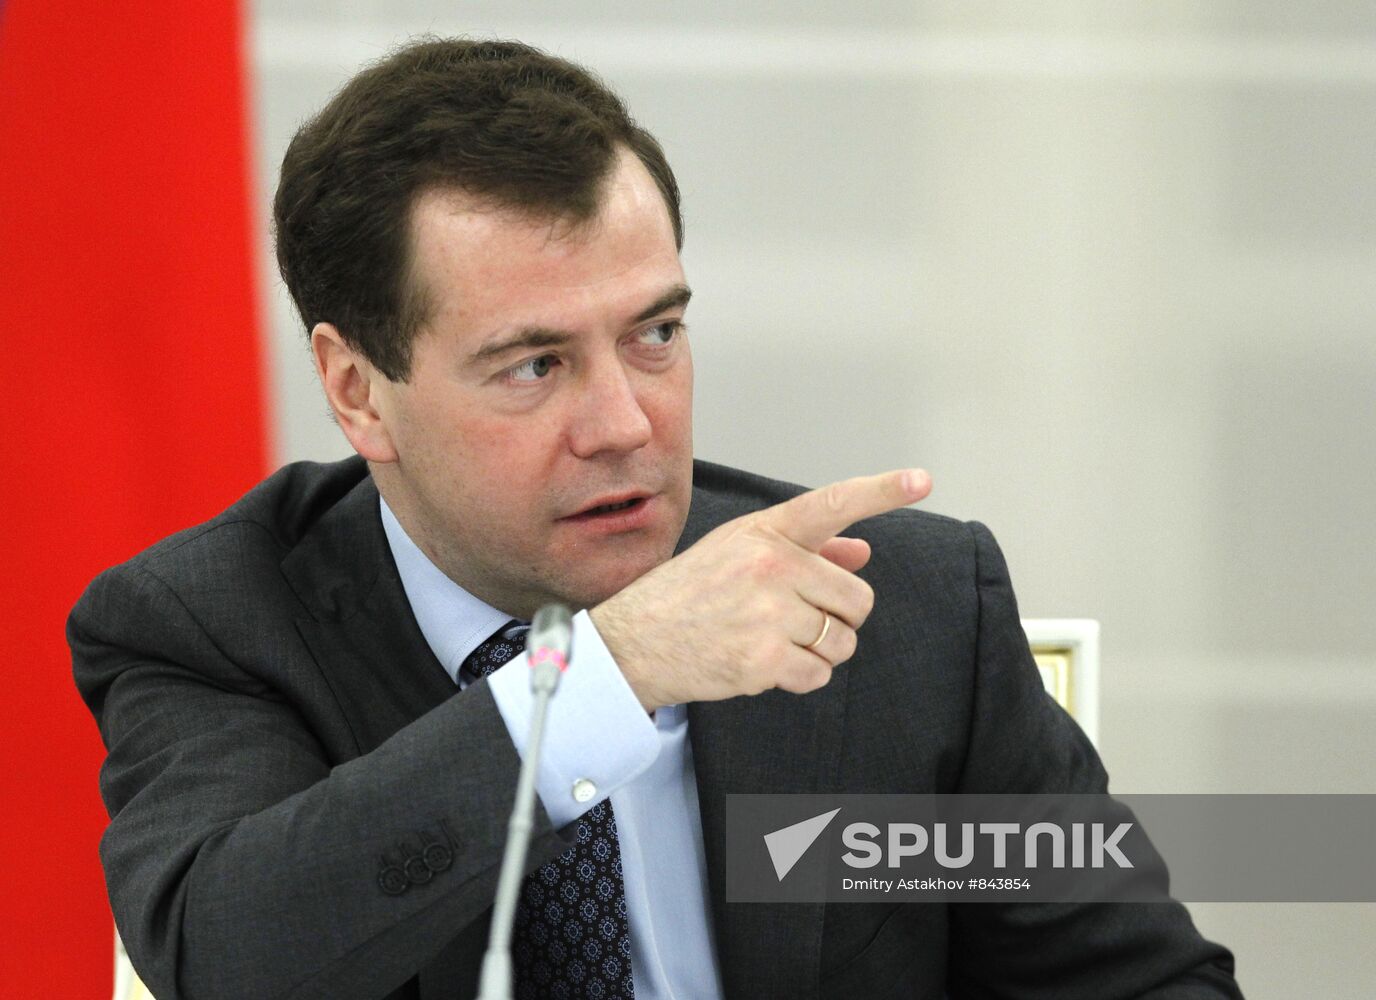 Dmitry Medvedev conducts meeting with Public Chamber members